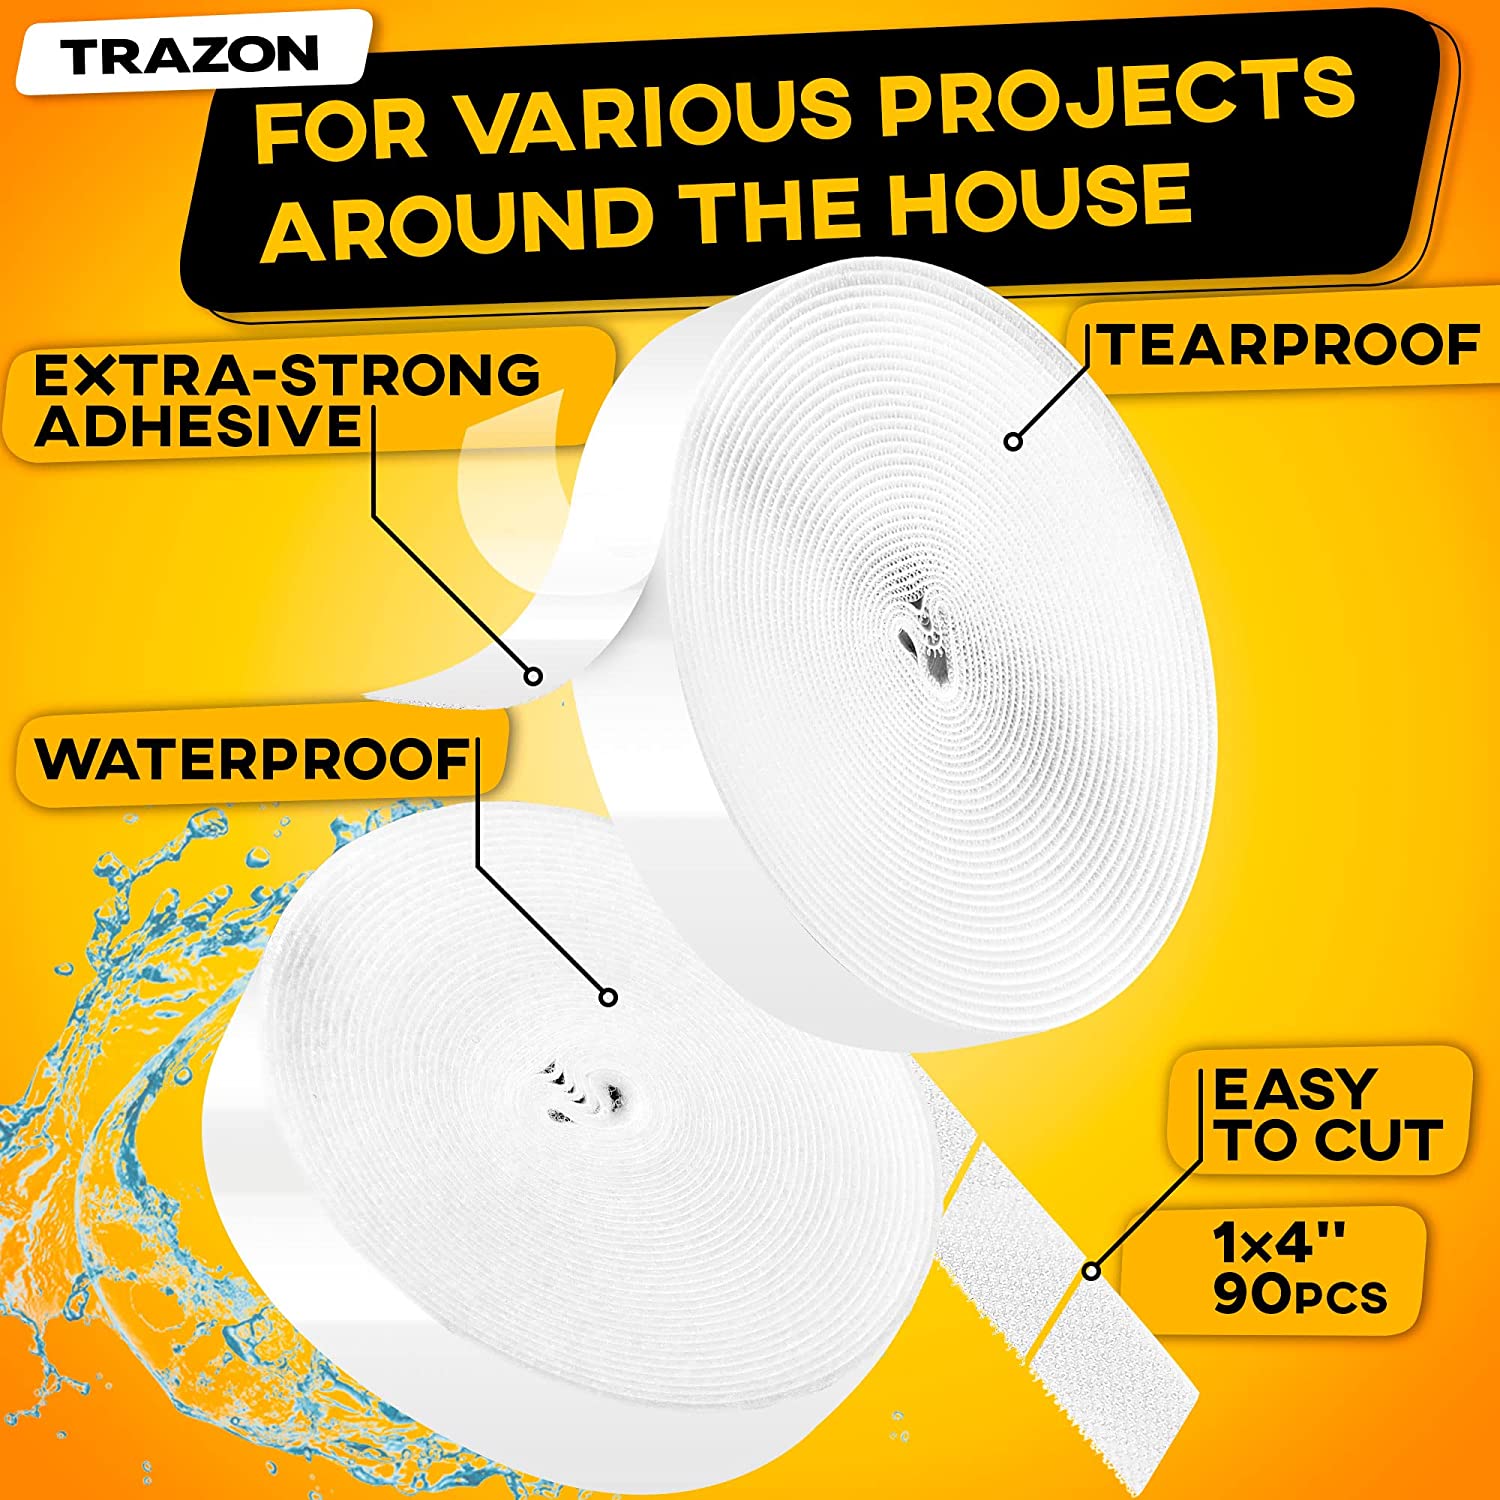  Heavy Duty Hook and Loop Dots with Adhesive, Super